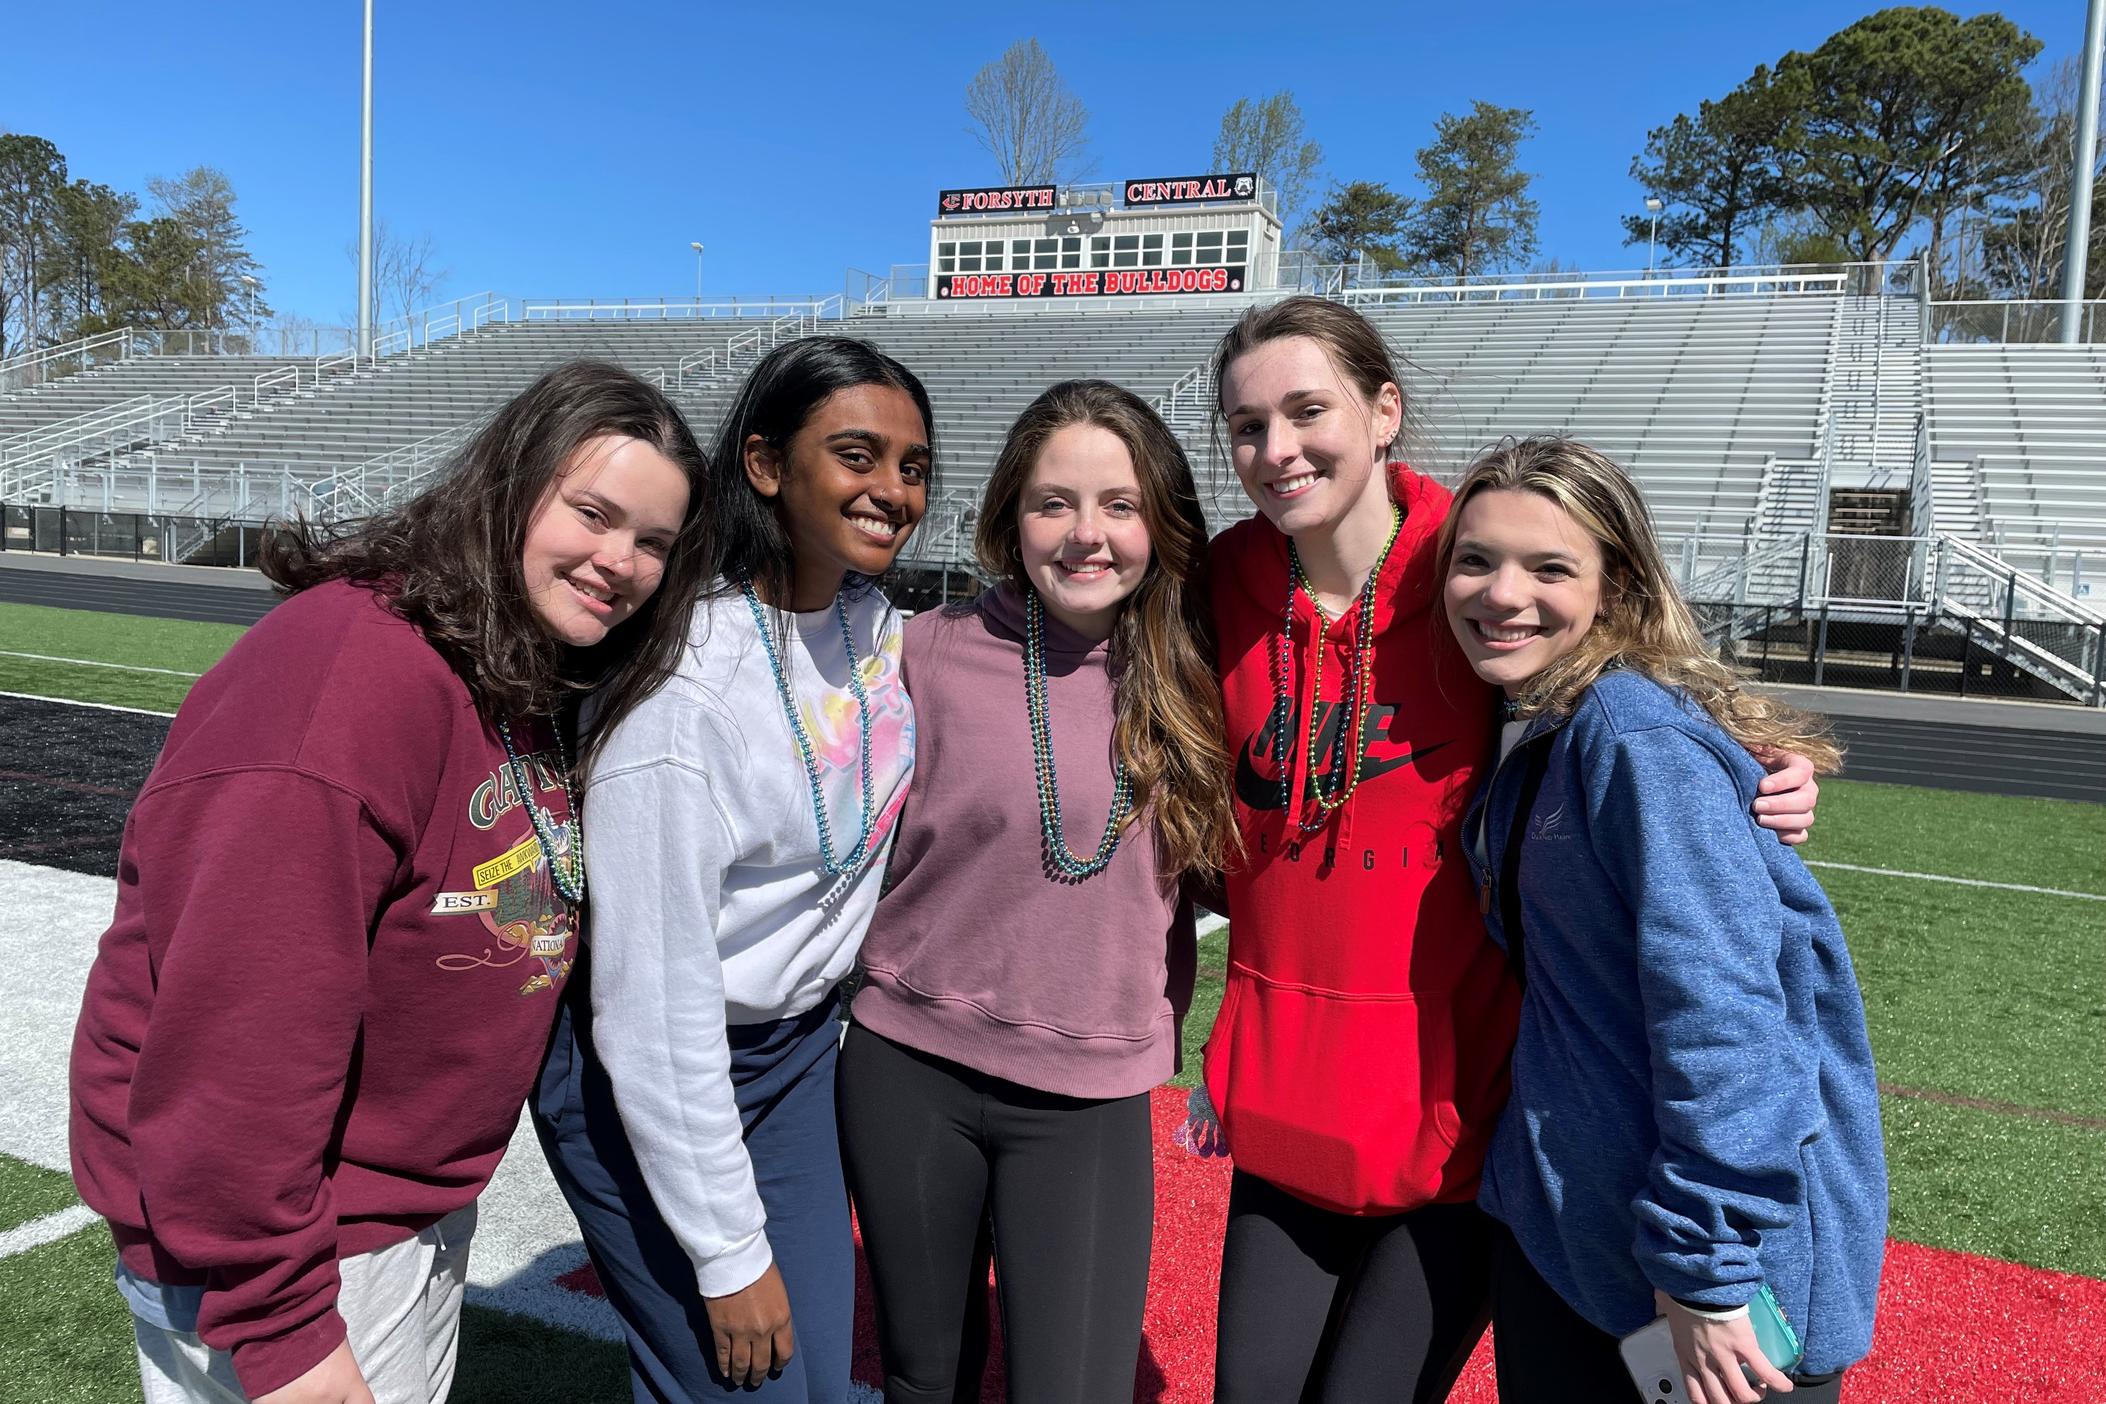 A group of five Forsyth County high school students gather at the Forsyth Central High School track for an Out of the Darkness walk March 26, 2022, including the event's organizer, Ali Norris (center).